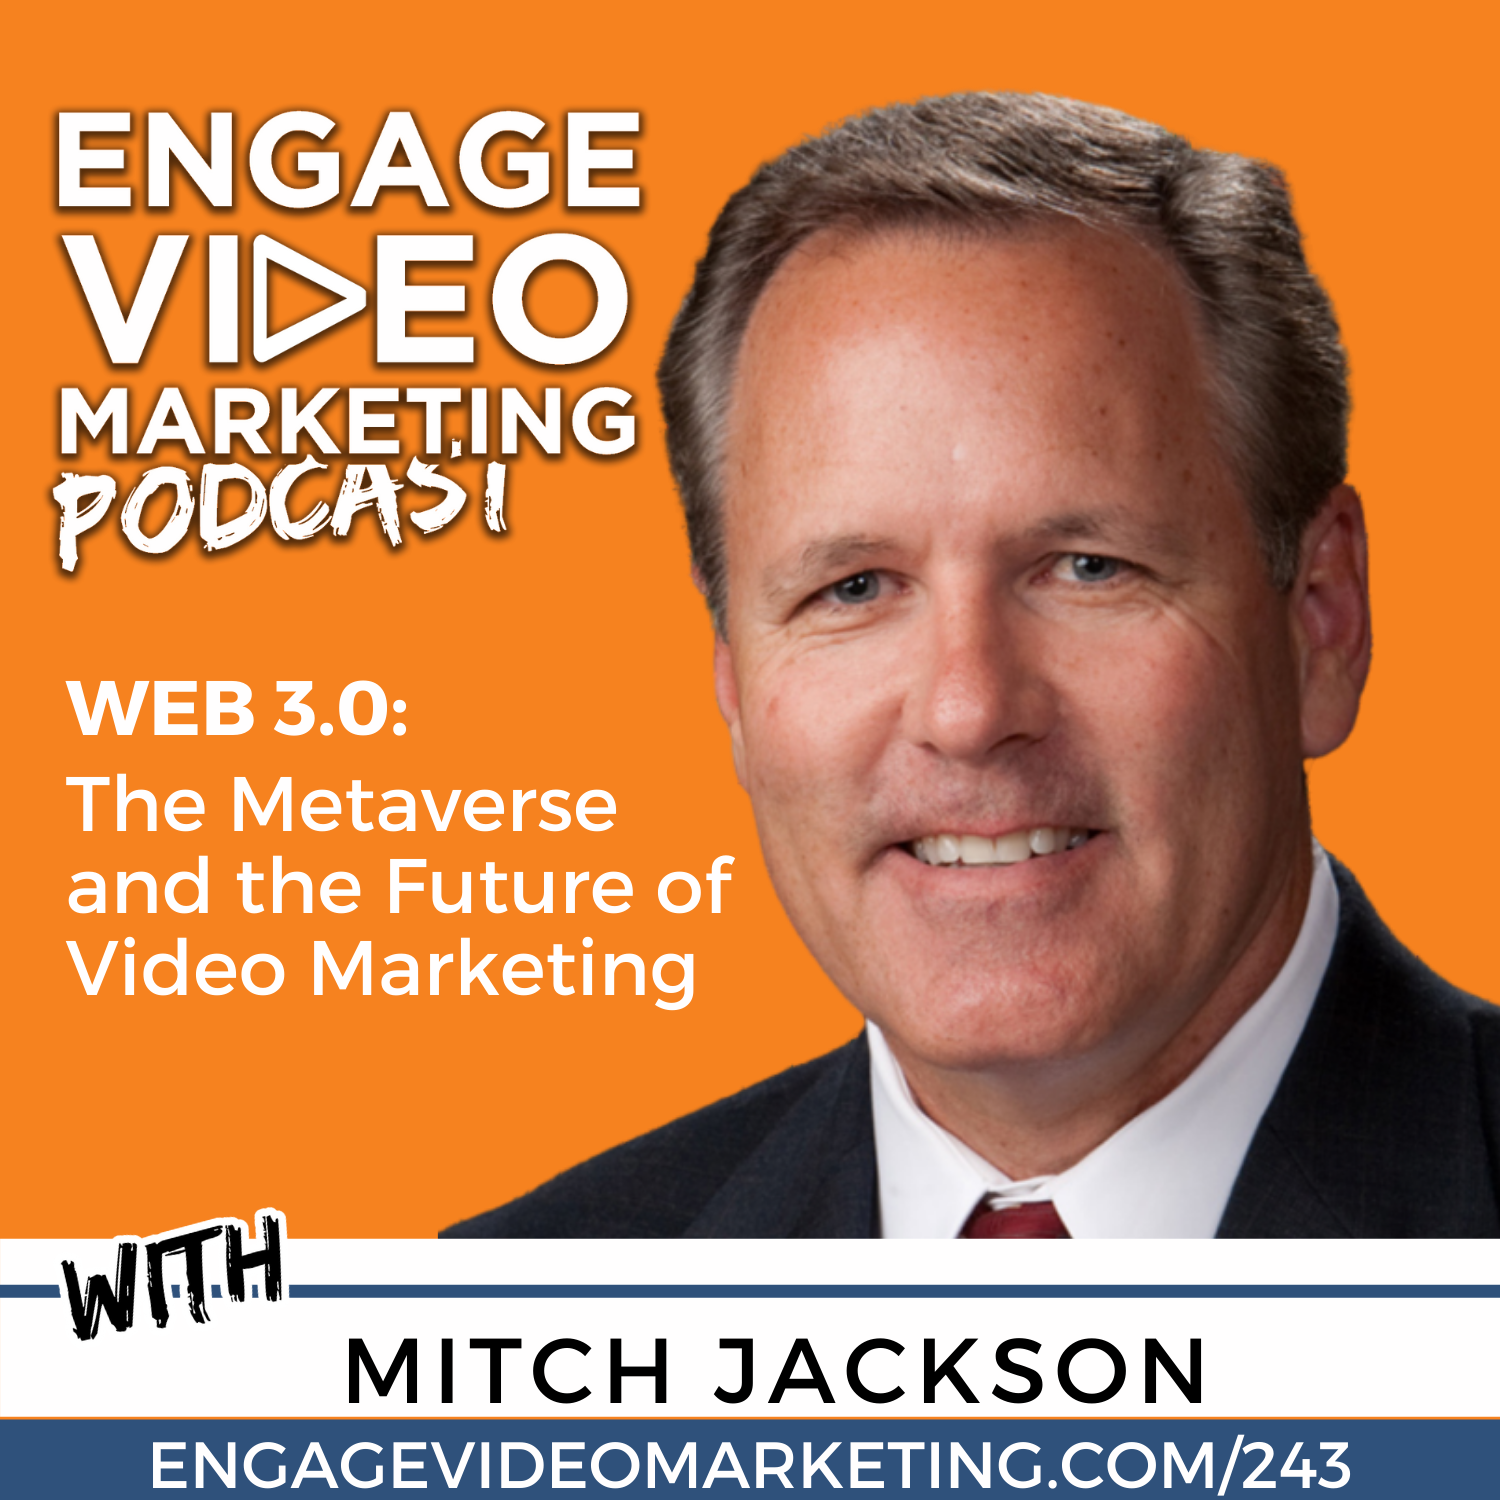 Web3.0: The Metaverse and the Future of Video Marketing with Mitch Jackson